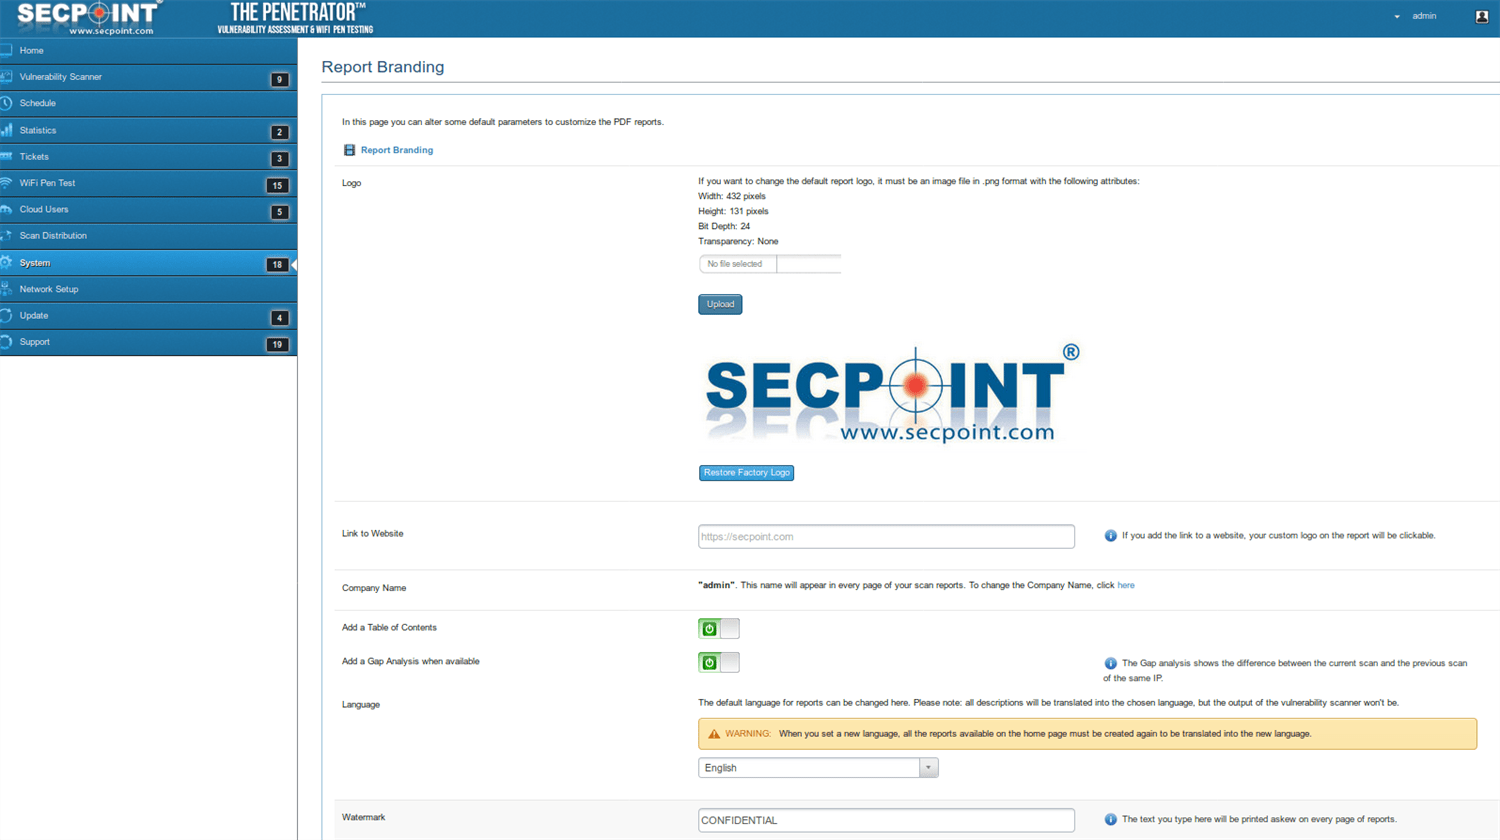 SecPoint Penetrator S9 - 32 IP Concurrent Scan License 1 Year Subscription - SecPoint